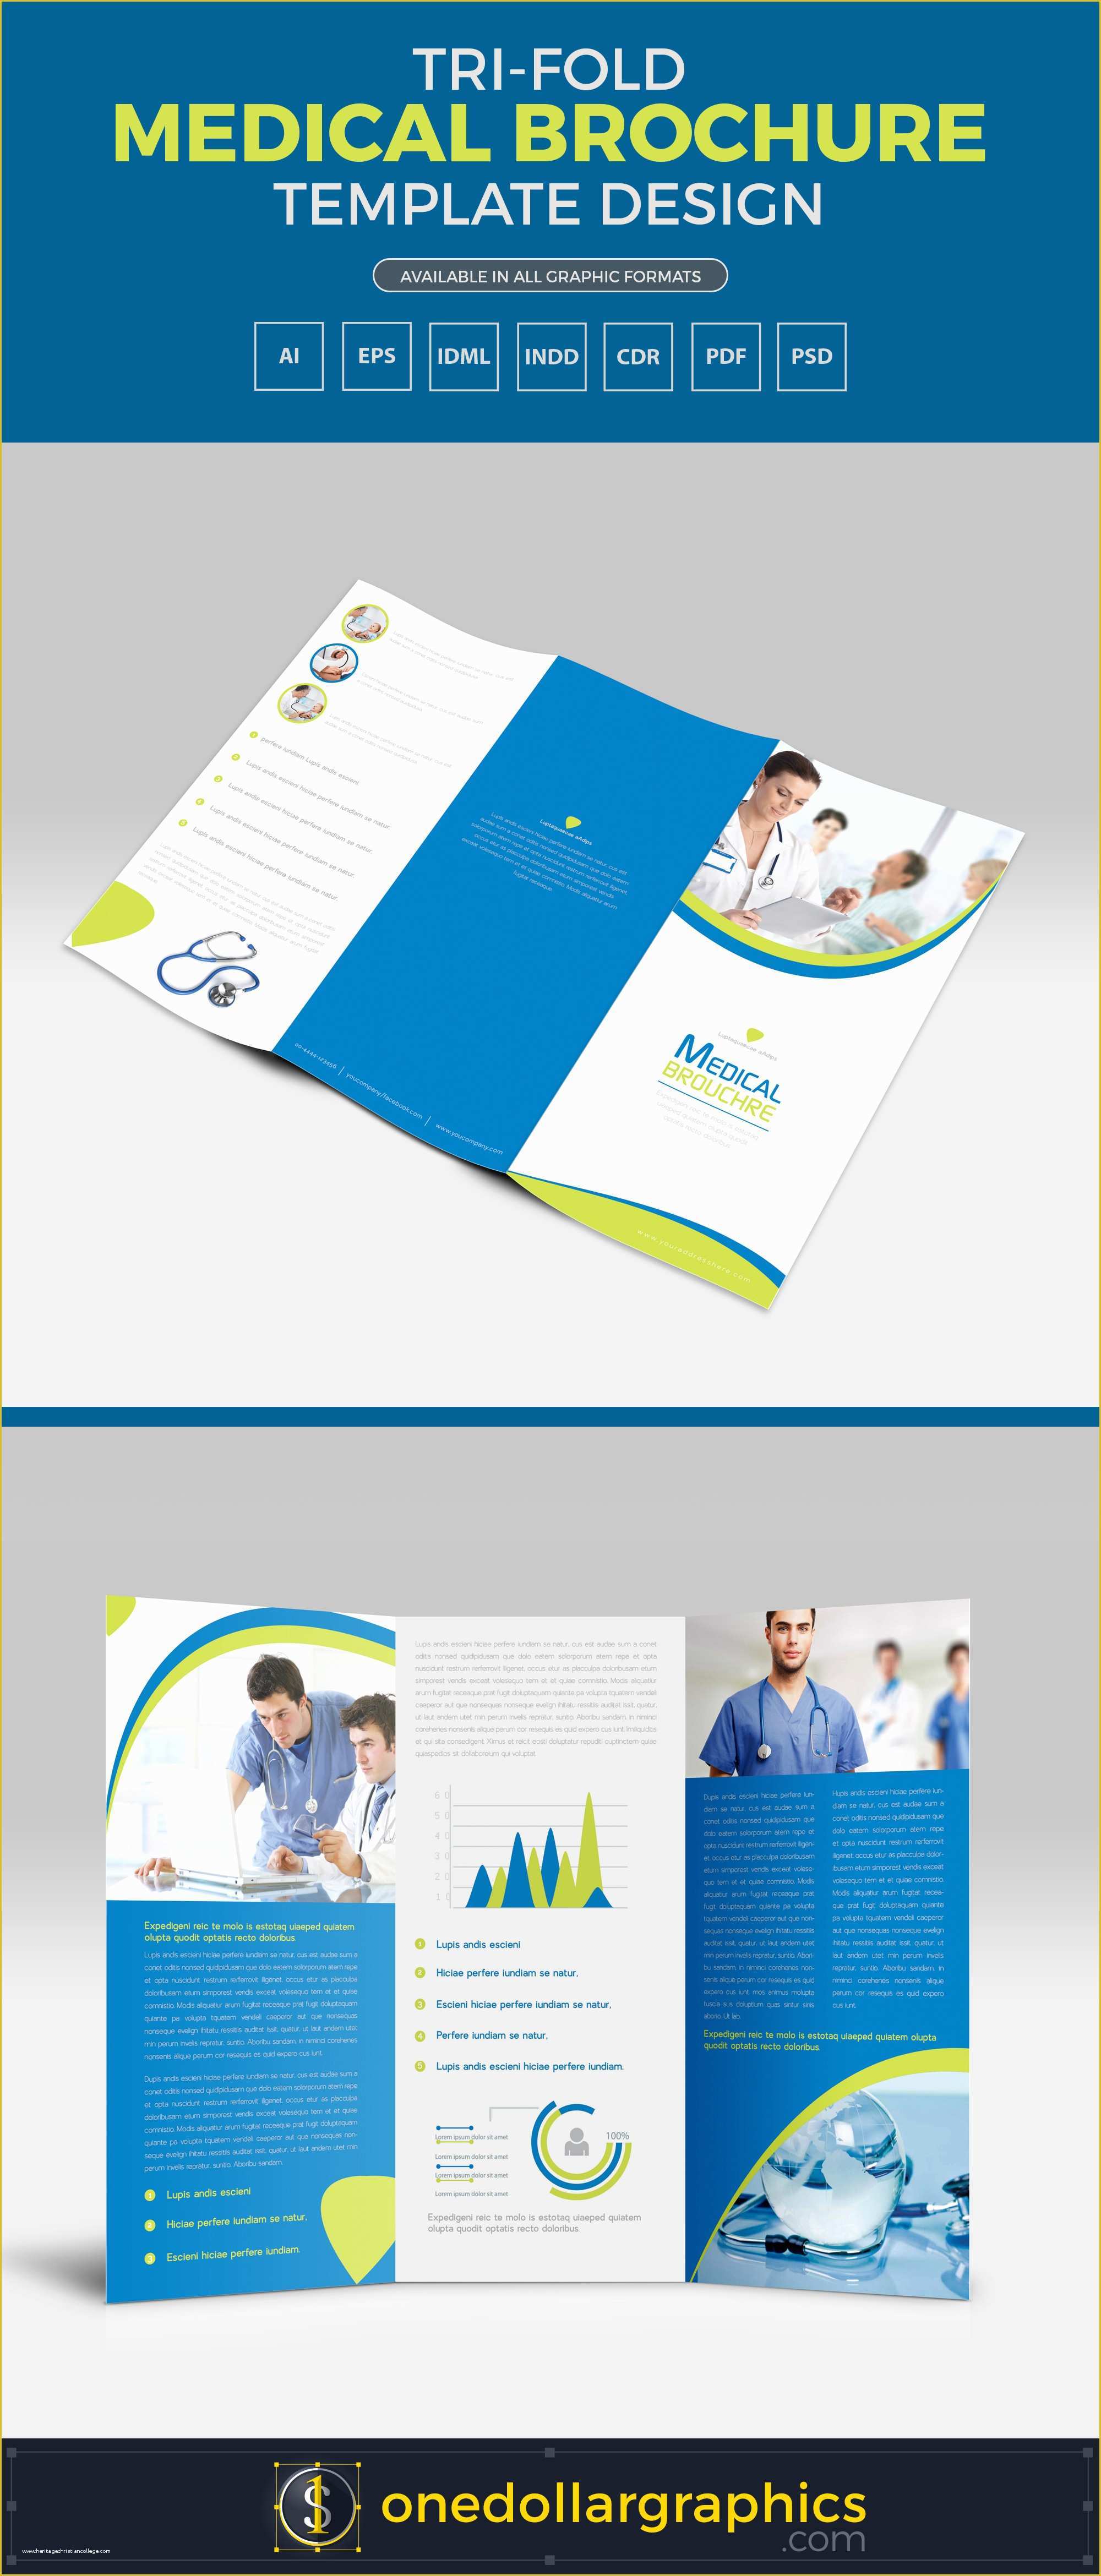 Medical Brochure Templates Free Of Free Medical Brochure Templates Portablegasgrillweber